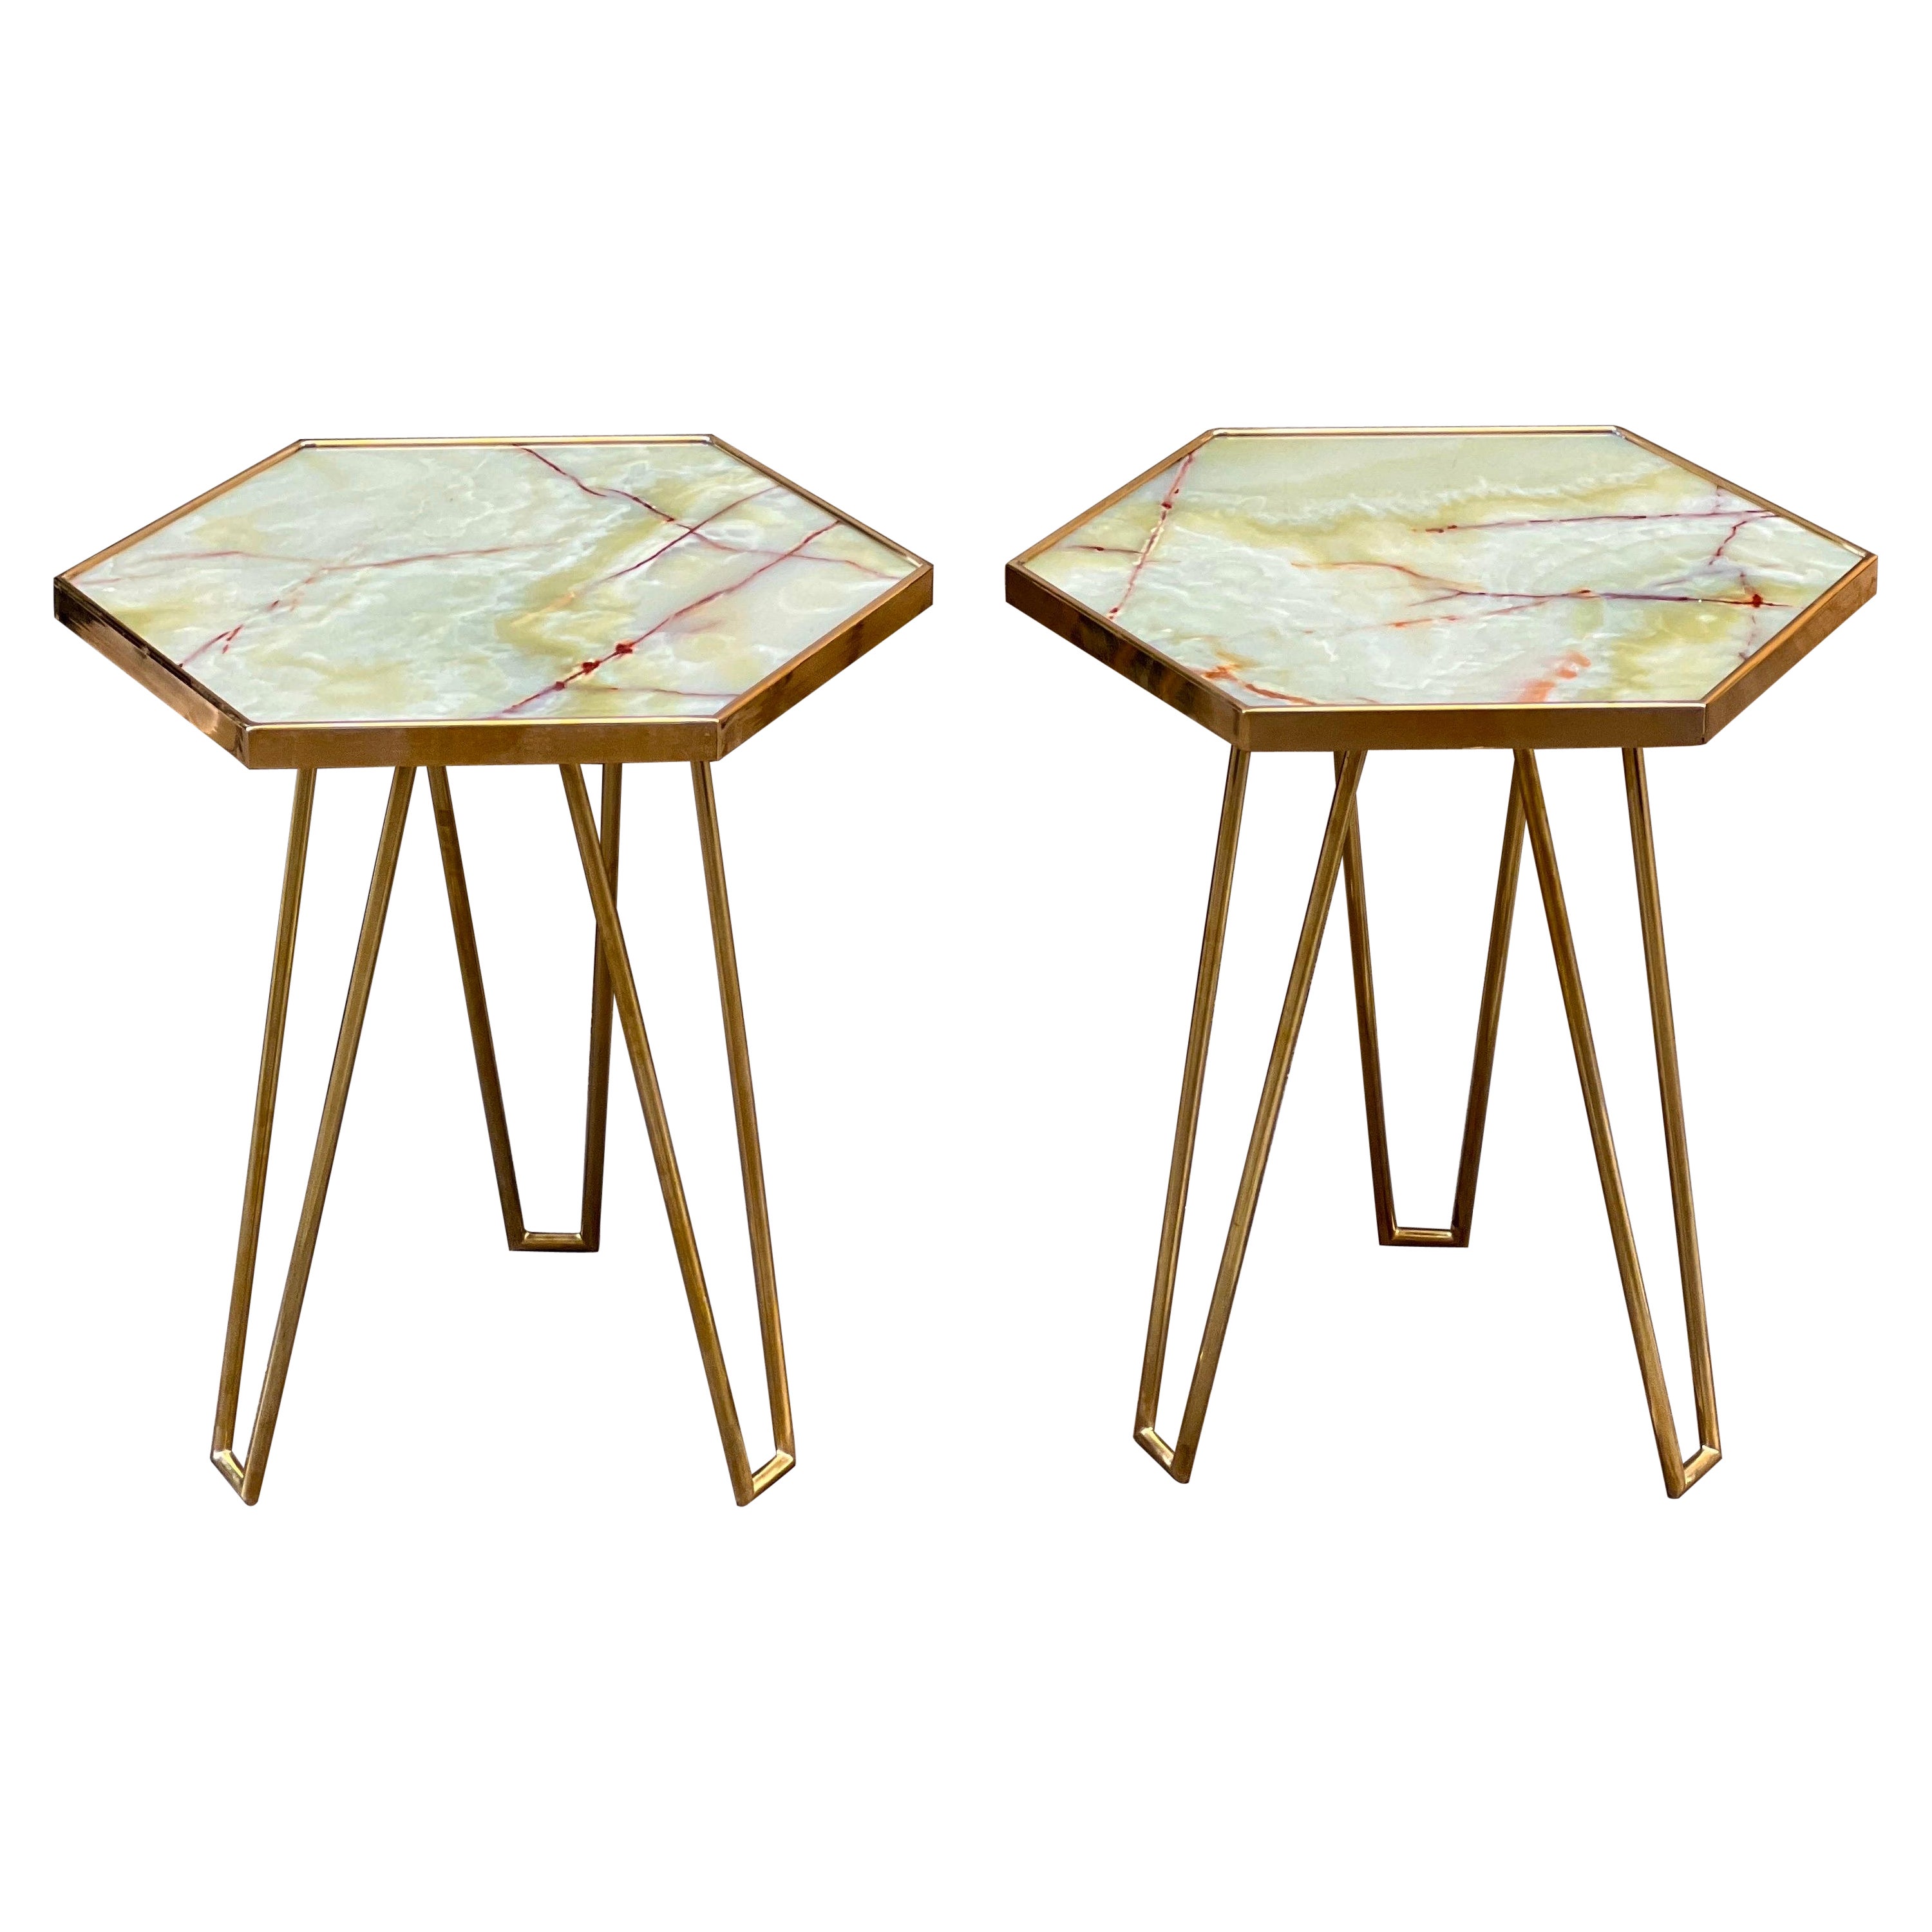 Pair of Vintage Italian Jade Green Onyx and Brass Tables, 1980